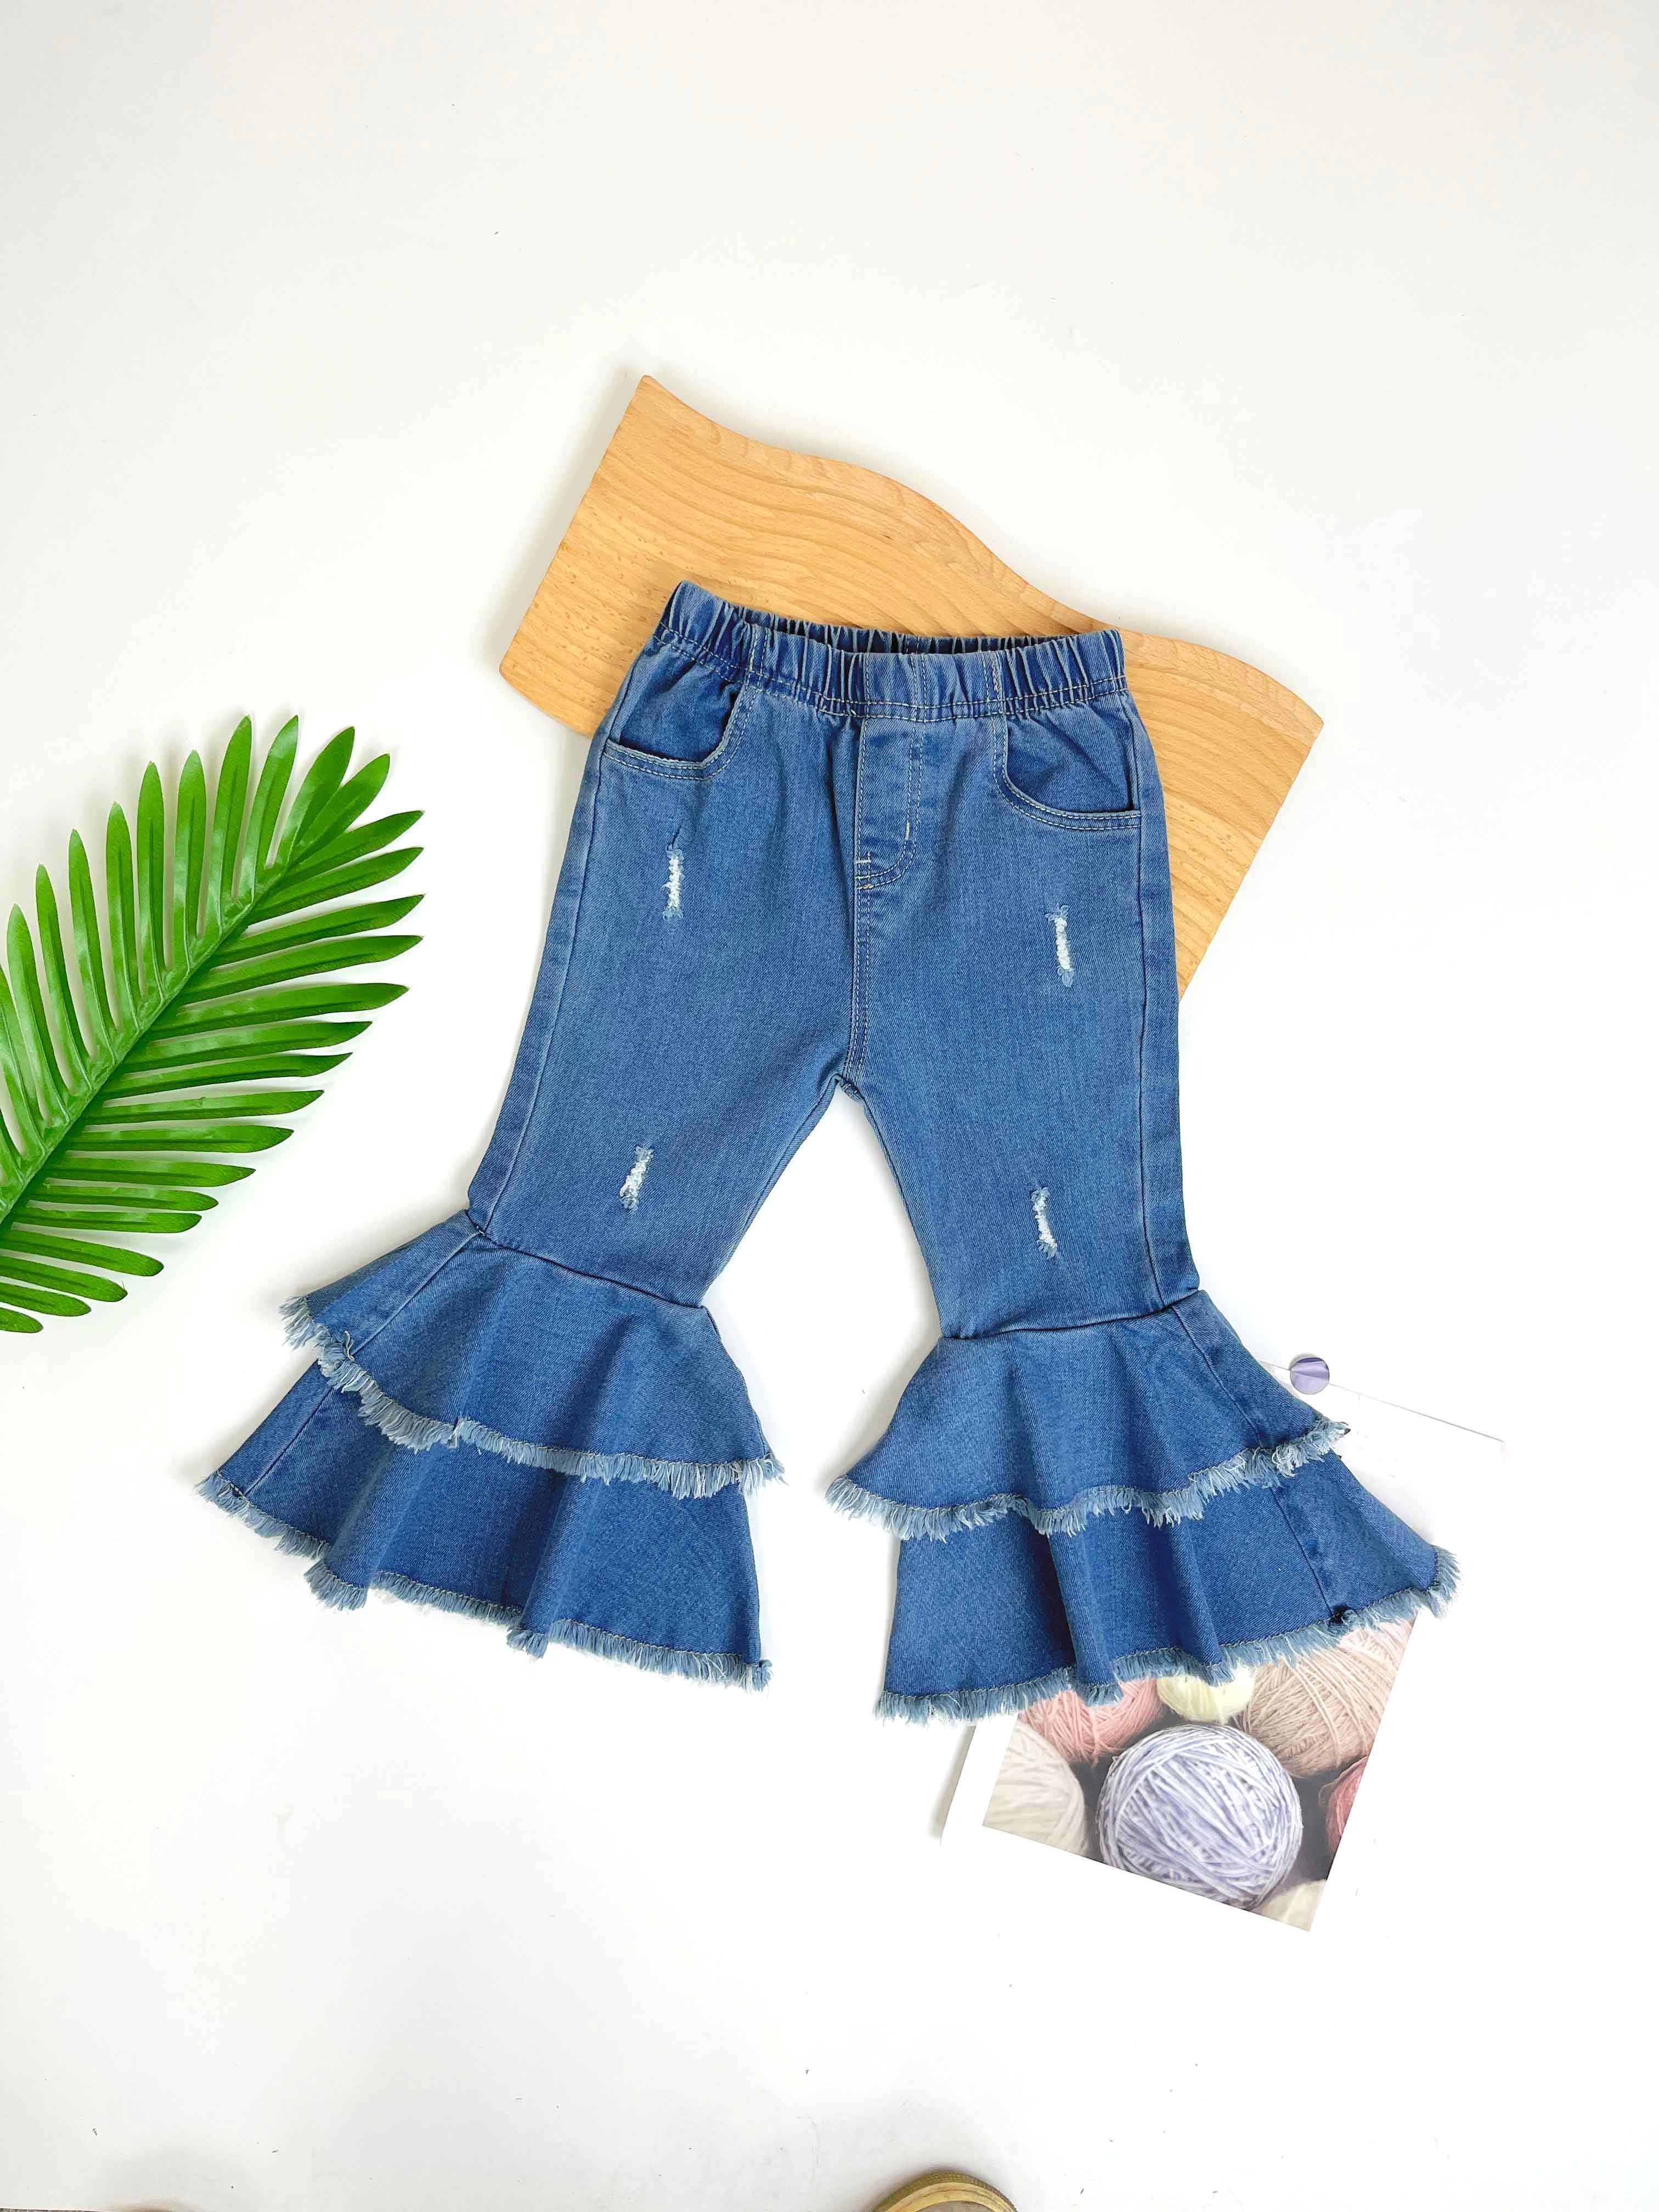  Zanjkr Girls Gymnastics Outfit Toddler Denim 3D Flower Print  Pants Baby Trousers Ruffles Lace Jeans for Kids 3 to 12 Years (Blue, 11-12  Years) : Sports & Outdoors